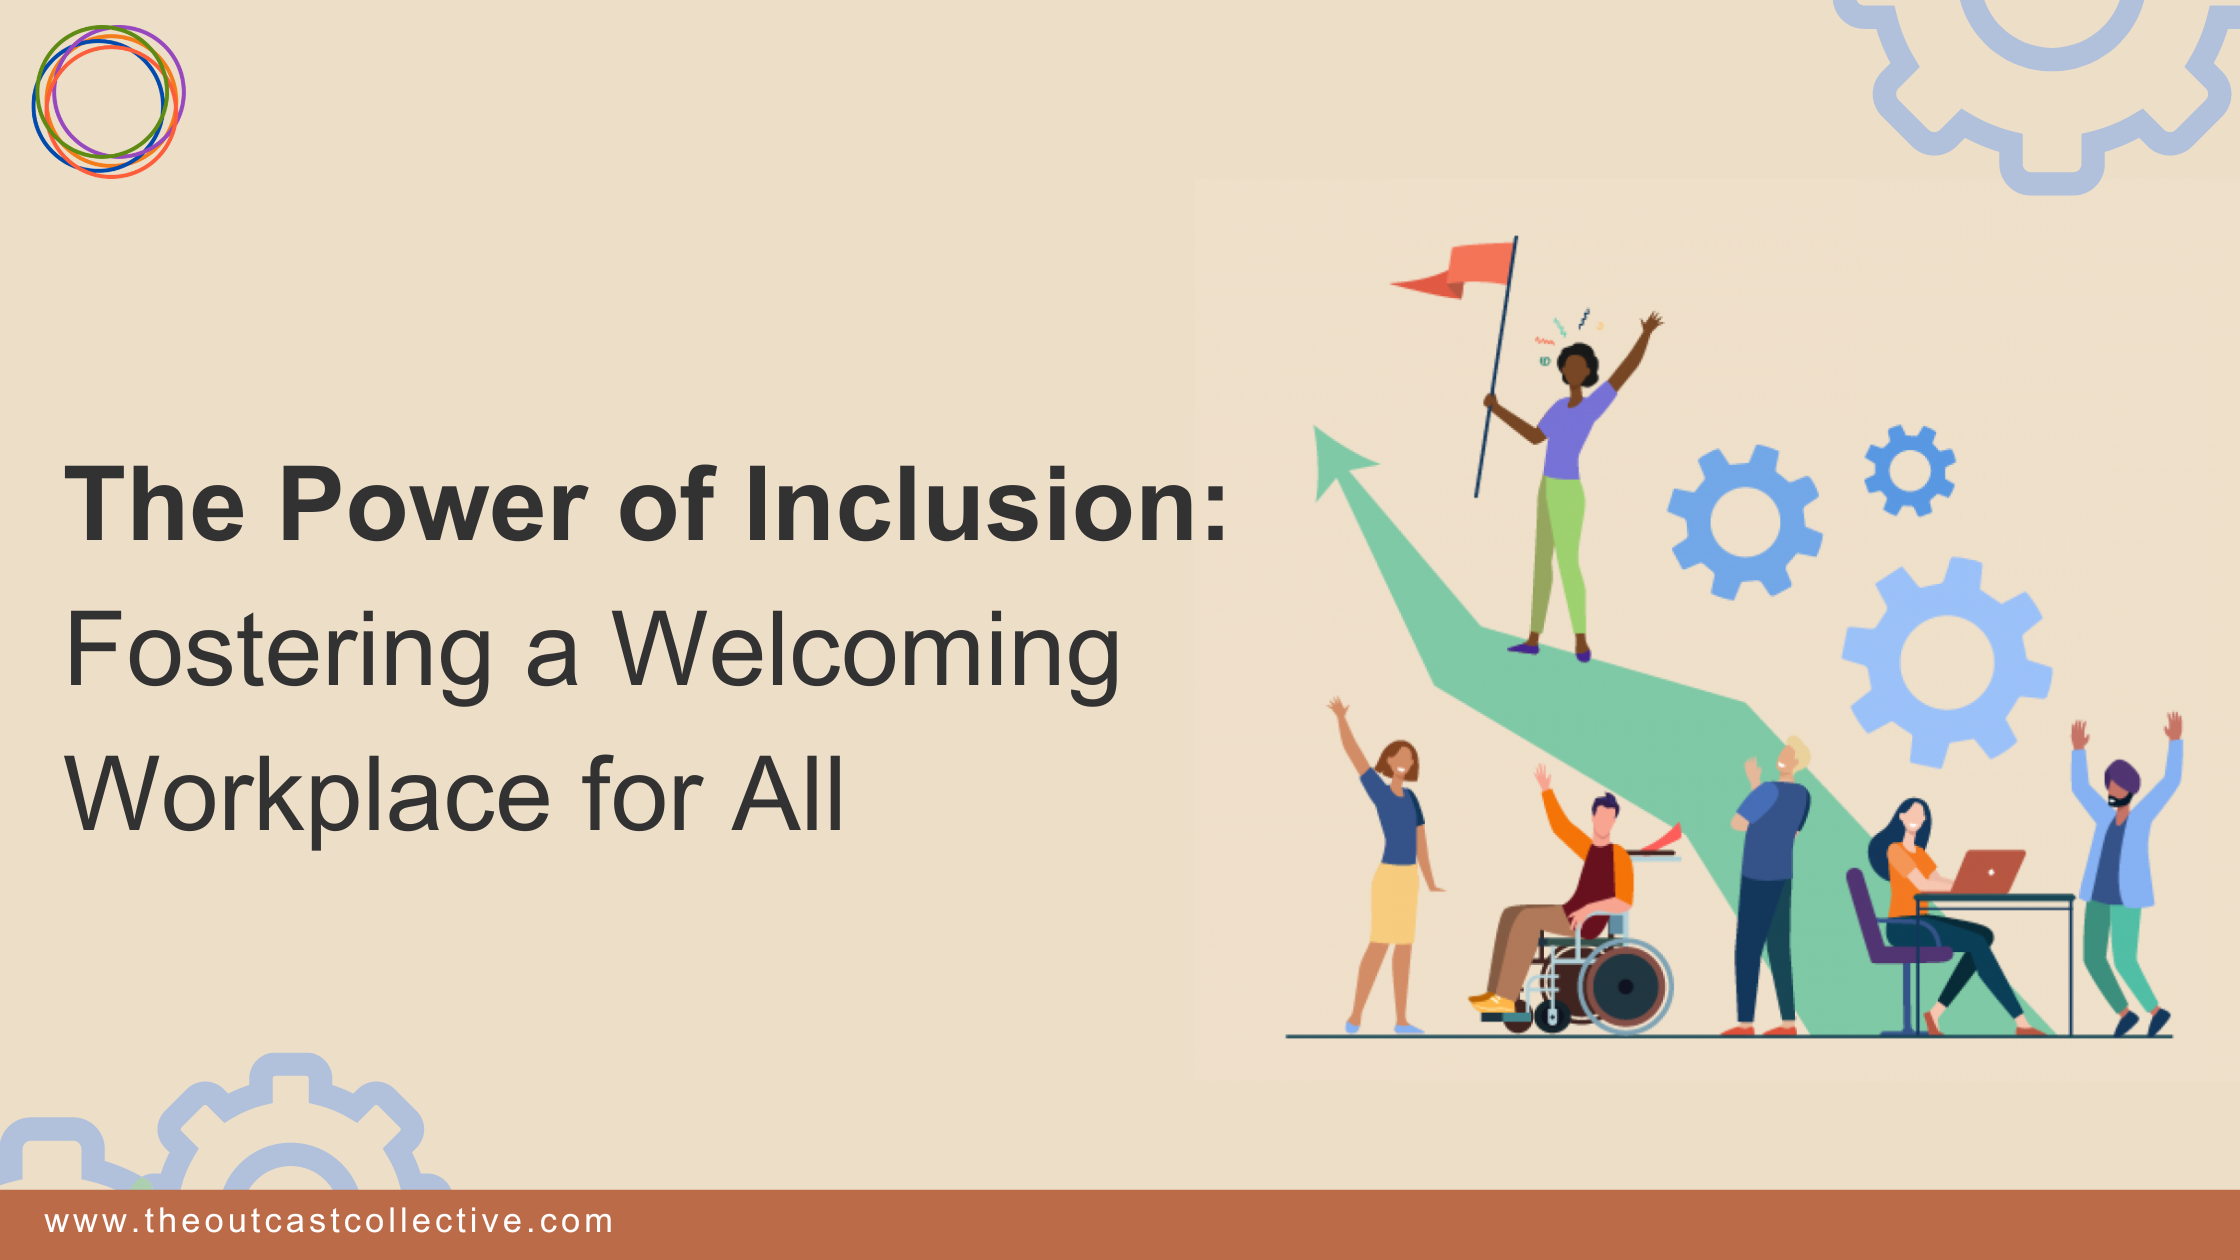 The Power of Inclusion